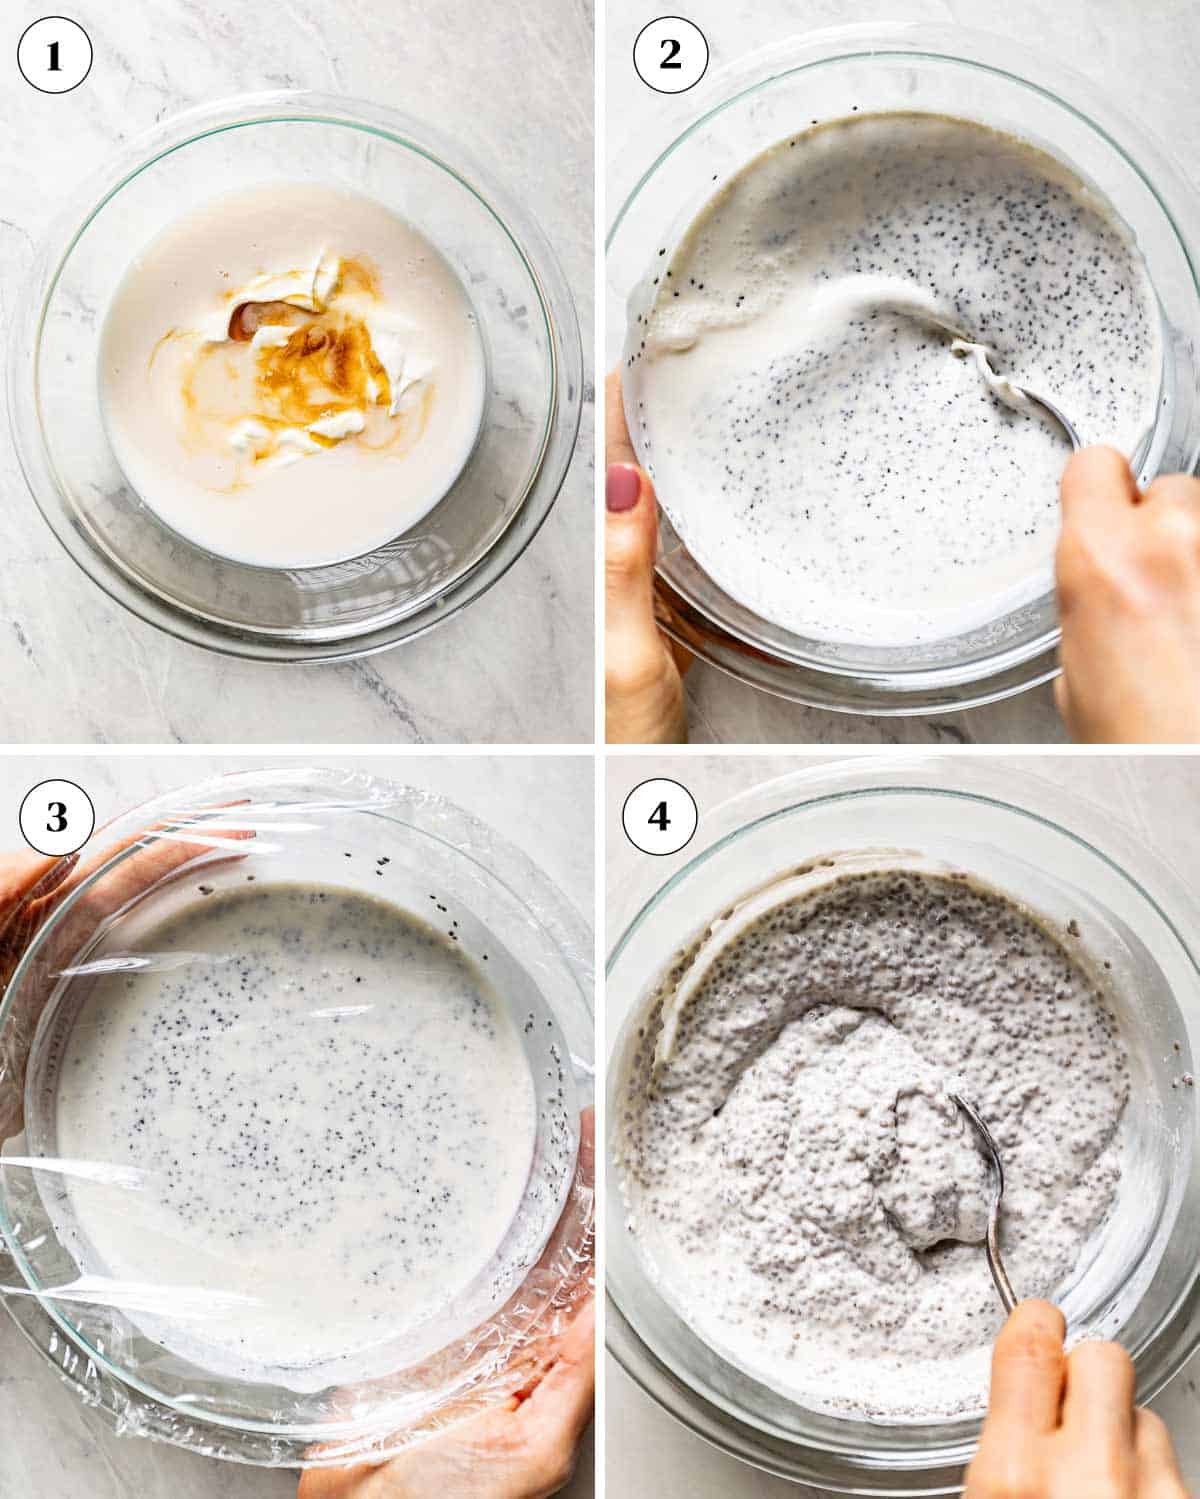 A collage of images showing how to make yogurt chia pudding.